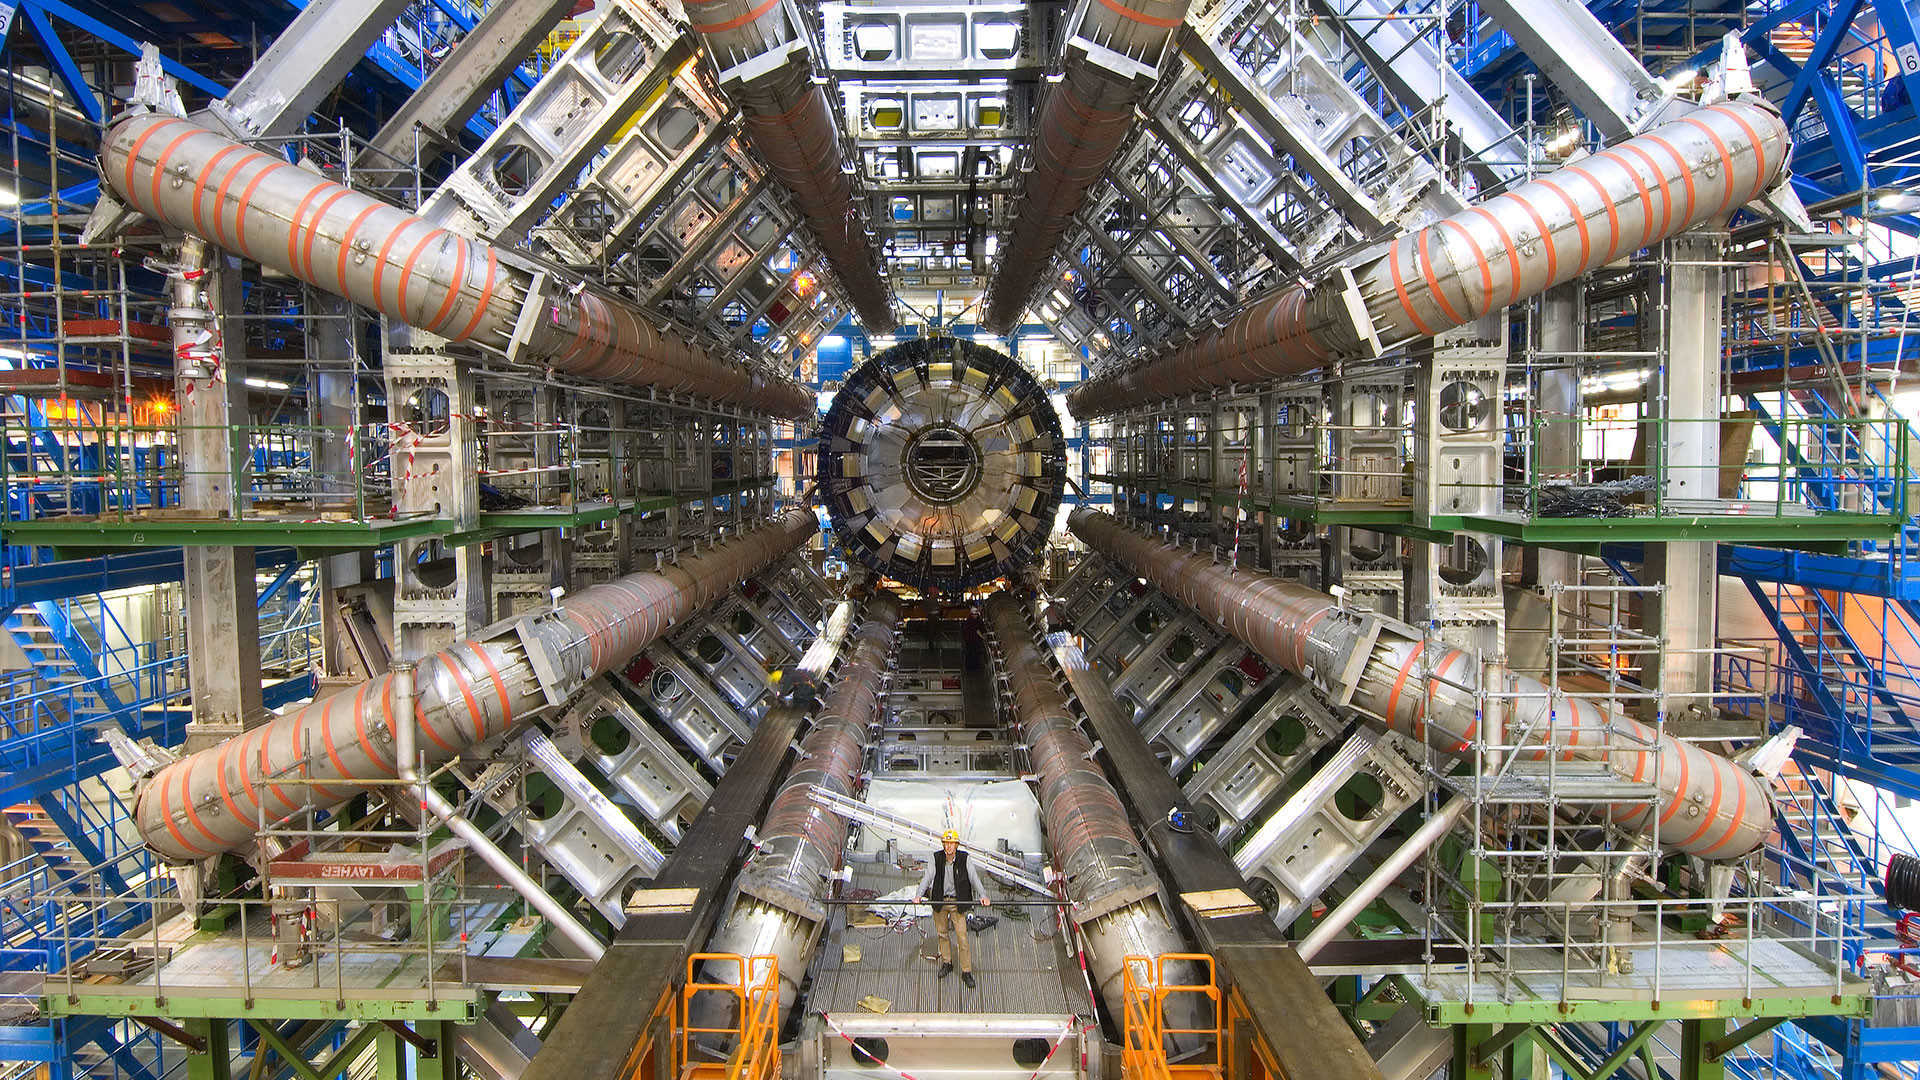 1920x1080 BU Physicists Investigate Proton Collisions at Large Hadron Collider (LHC)  at CERN, Searching for New Physics | Research